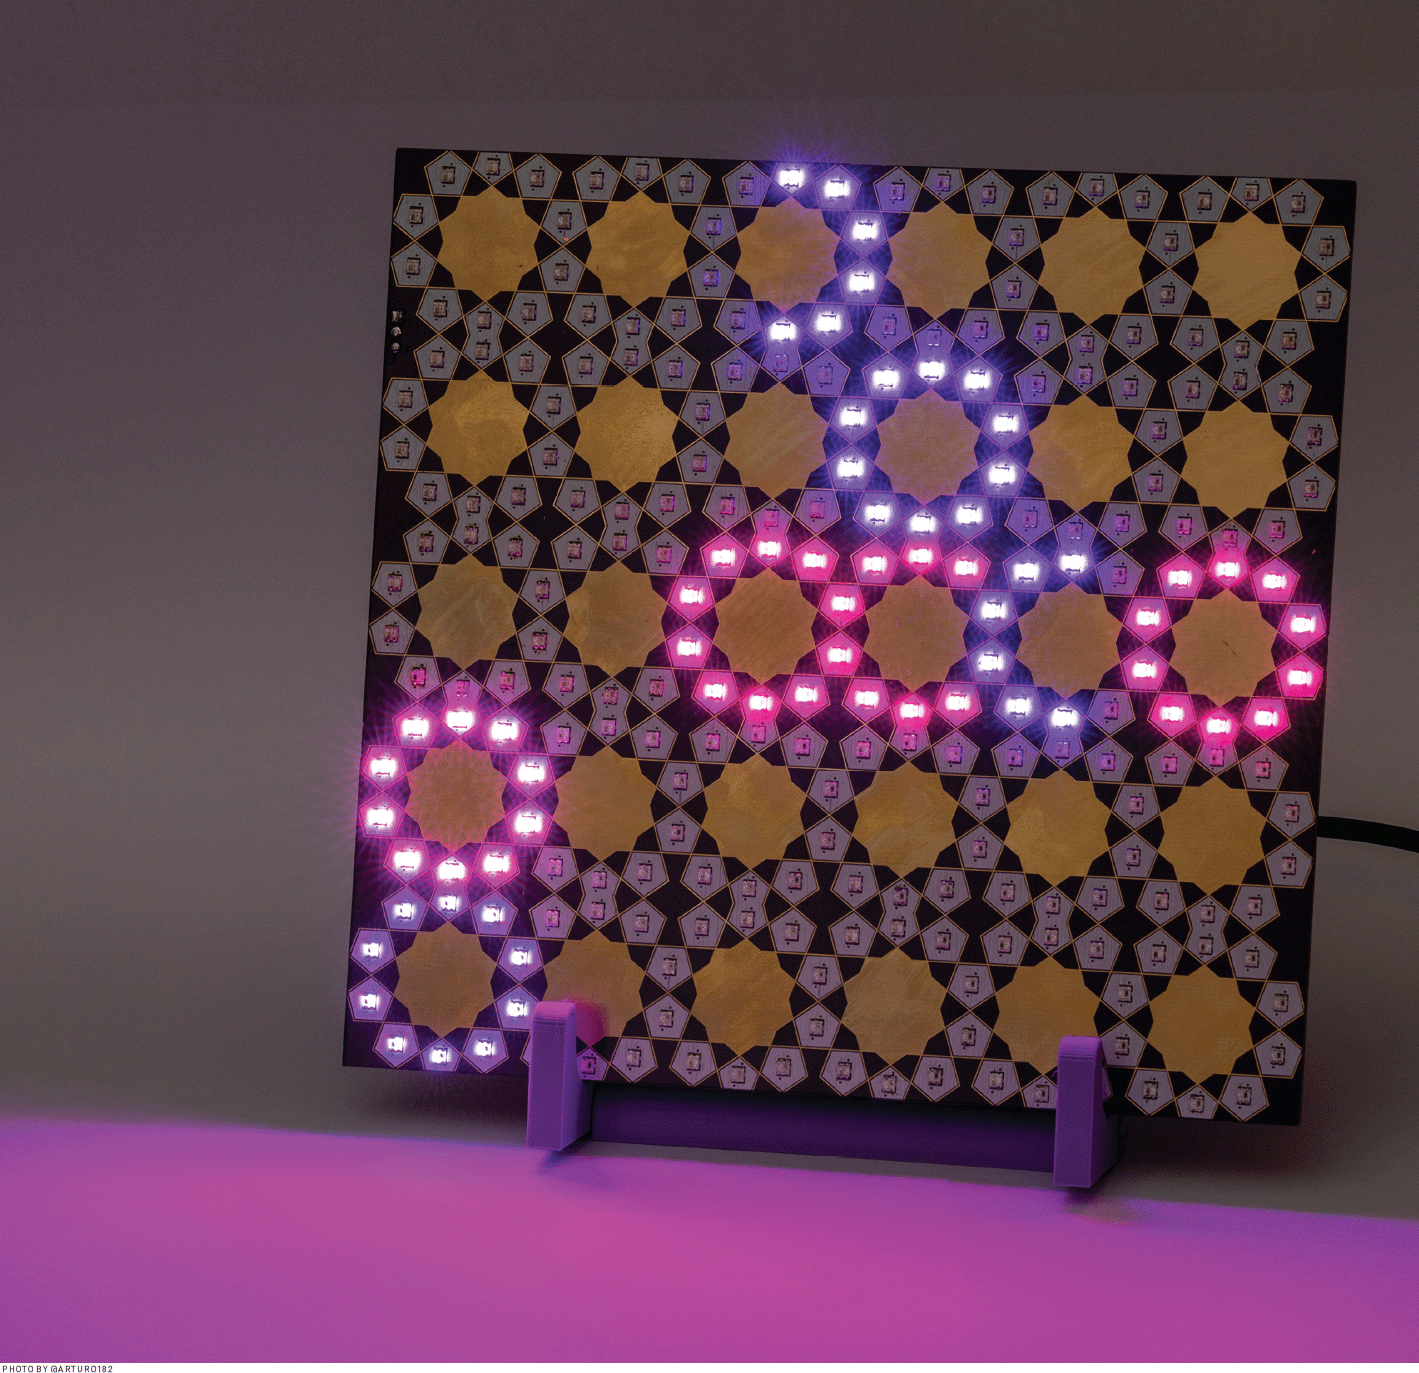 A printed circuit board for visualizing moon phases and a menstruation cycle. The board's design consists of LEDs arranged in Islamic geometry patterns with circular units in a 6x5 grid (30 units). Some LED units are lit to show the moon phases in purple and menstruation days in pinkish red.